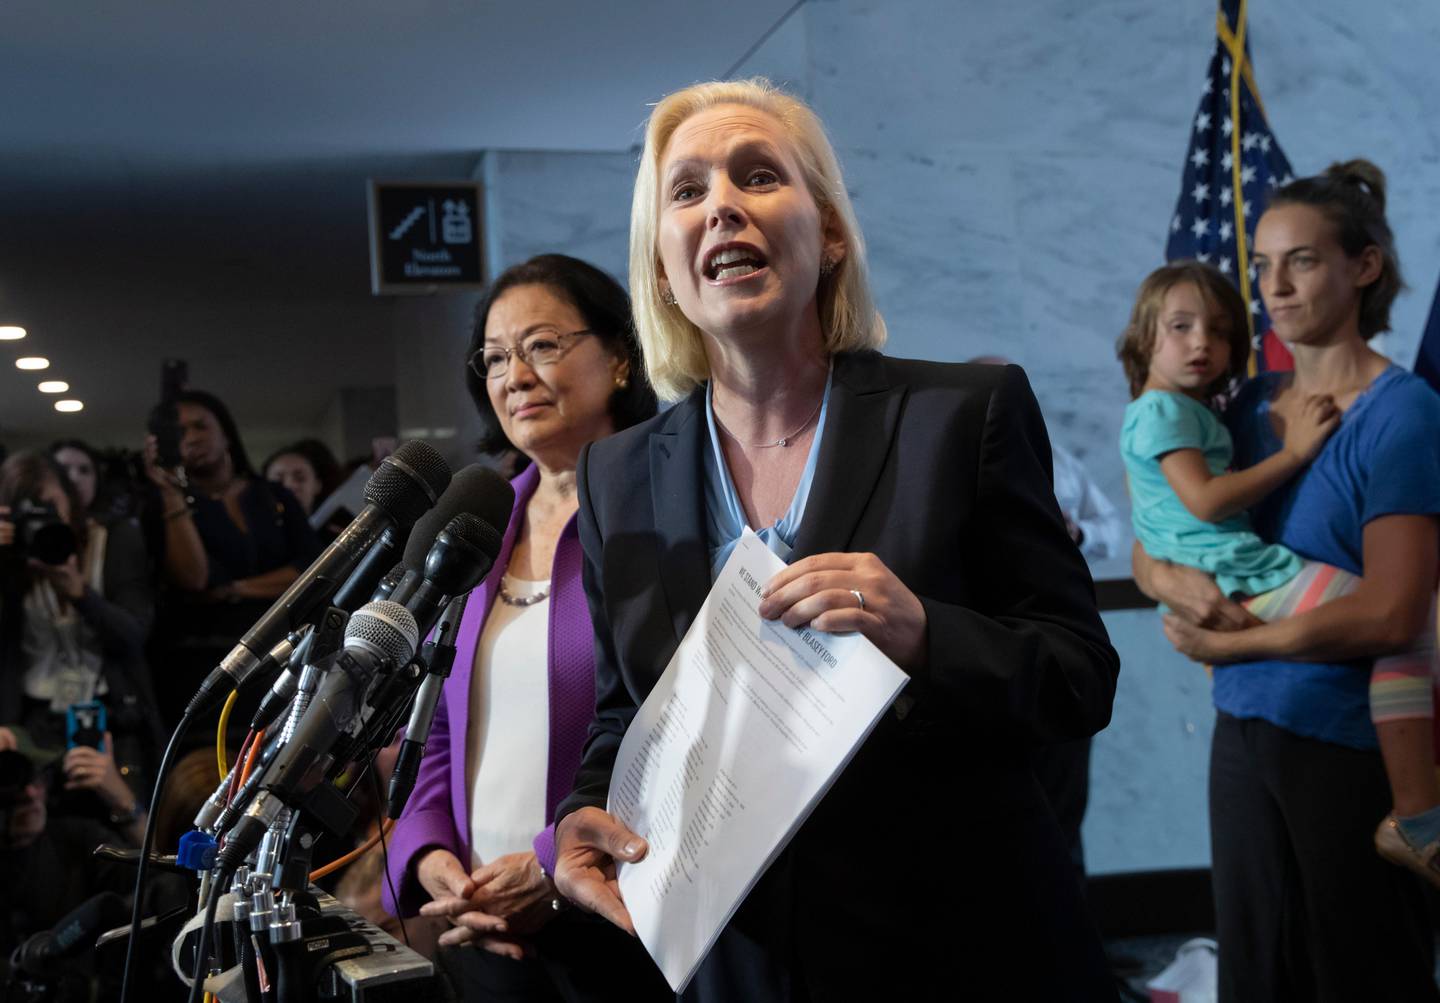 Sen. Kirsten Gillibrand, D-N.Y., with Sen. Mazie Hirono, D-Hawaii, left, joined by former students from Holton Arms School, speaks to reporters in support of professor Christine Blasey Ford, who is accusing Supreme Court nominee Brett Kavanaugh of a decades-old sexual attack, during a news conference on Capitol Hill in Washington, Thursday, Sept. 20, 2018. (AP Photo/J. Scott Applewhite)